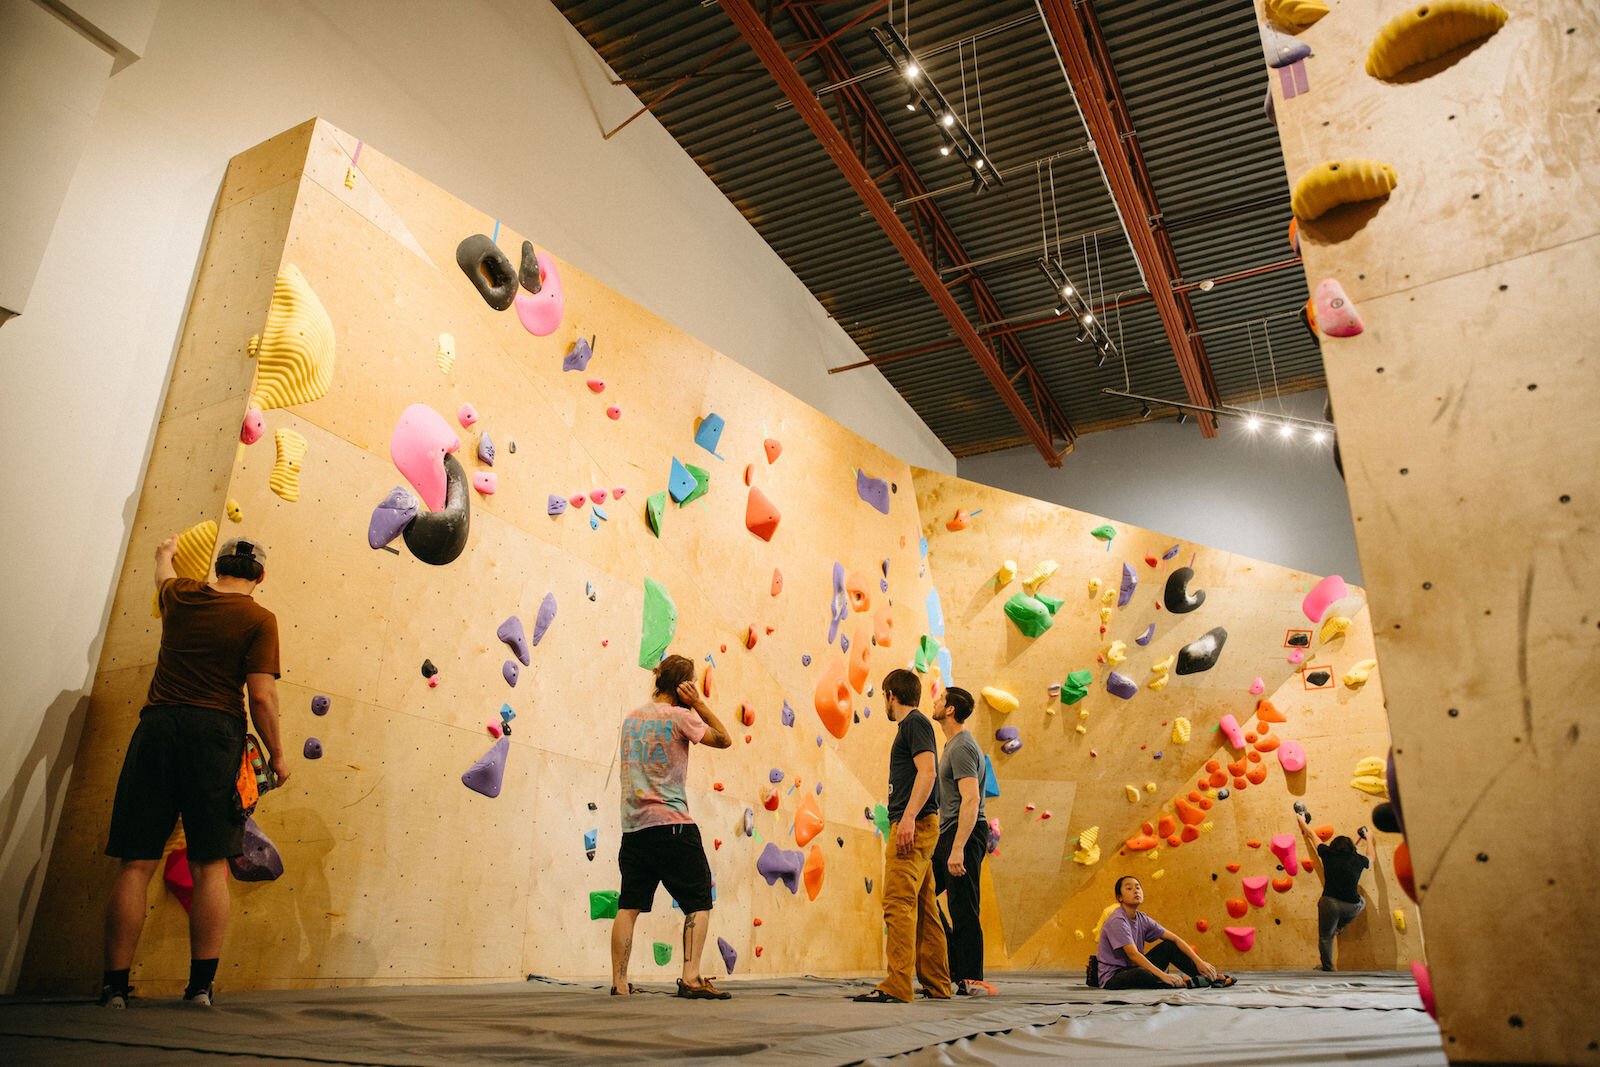 Summit City Climbing Co. features 2,130 square feet of bouldering.